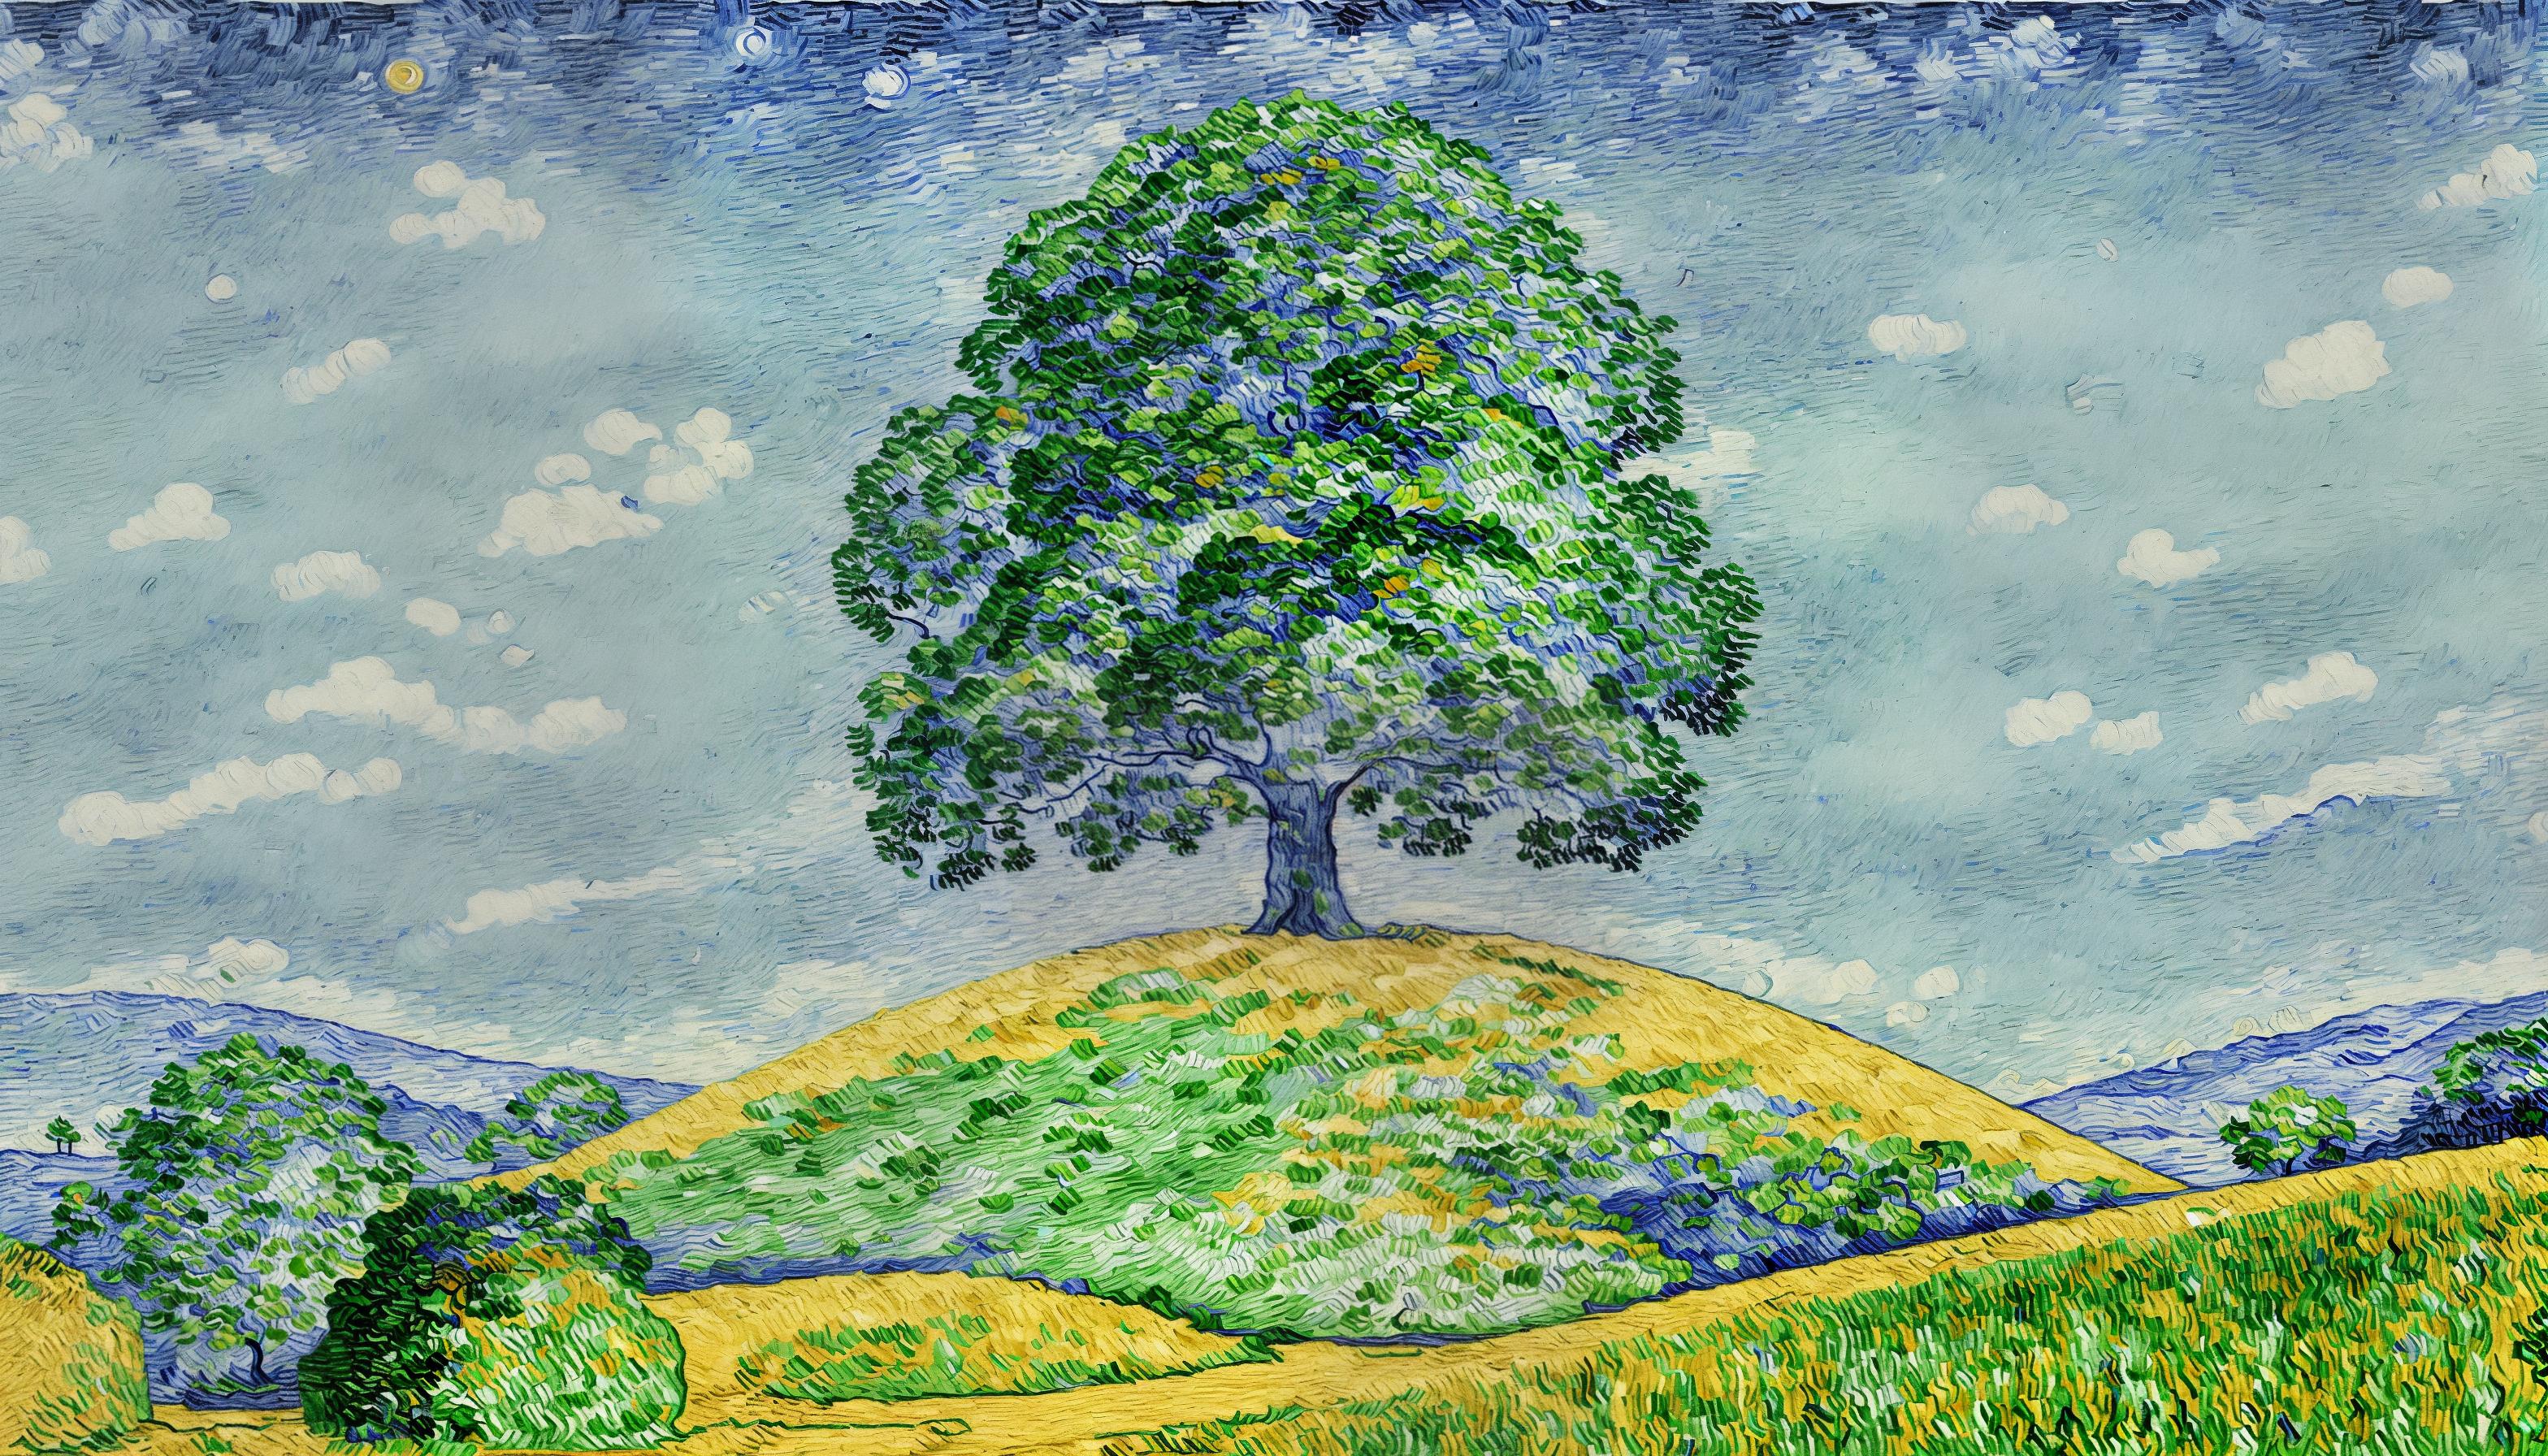  a beautiful painting of a SINGLE tree ontop of single hill surronded by a clear sky by van gough, v0ng44g, p0rtr14t, beautiful detailed art, masterpiece,